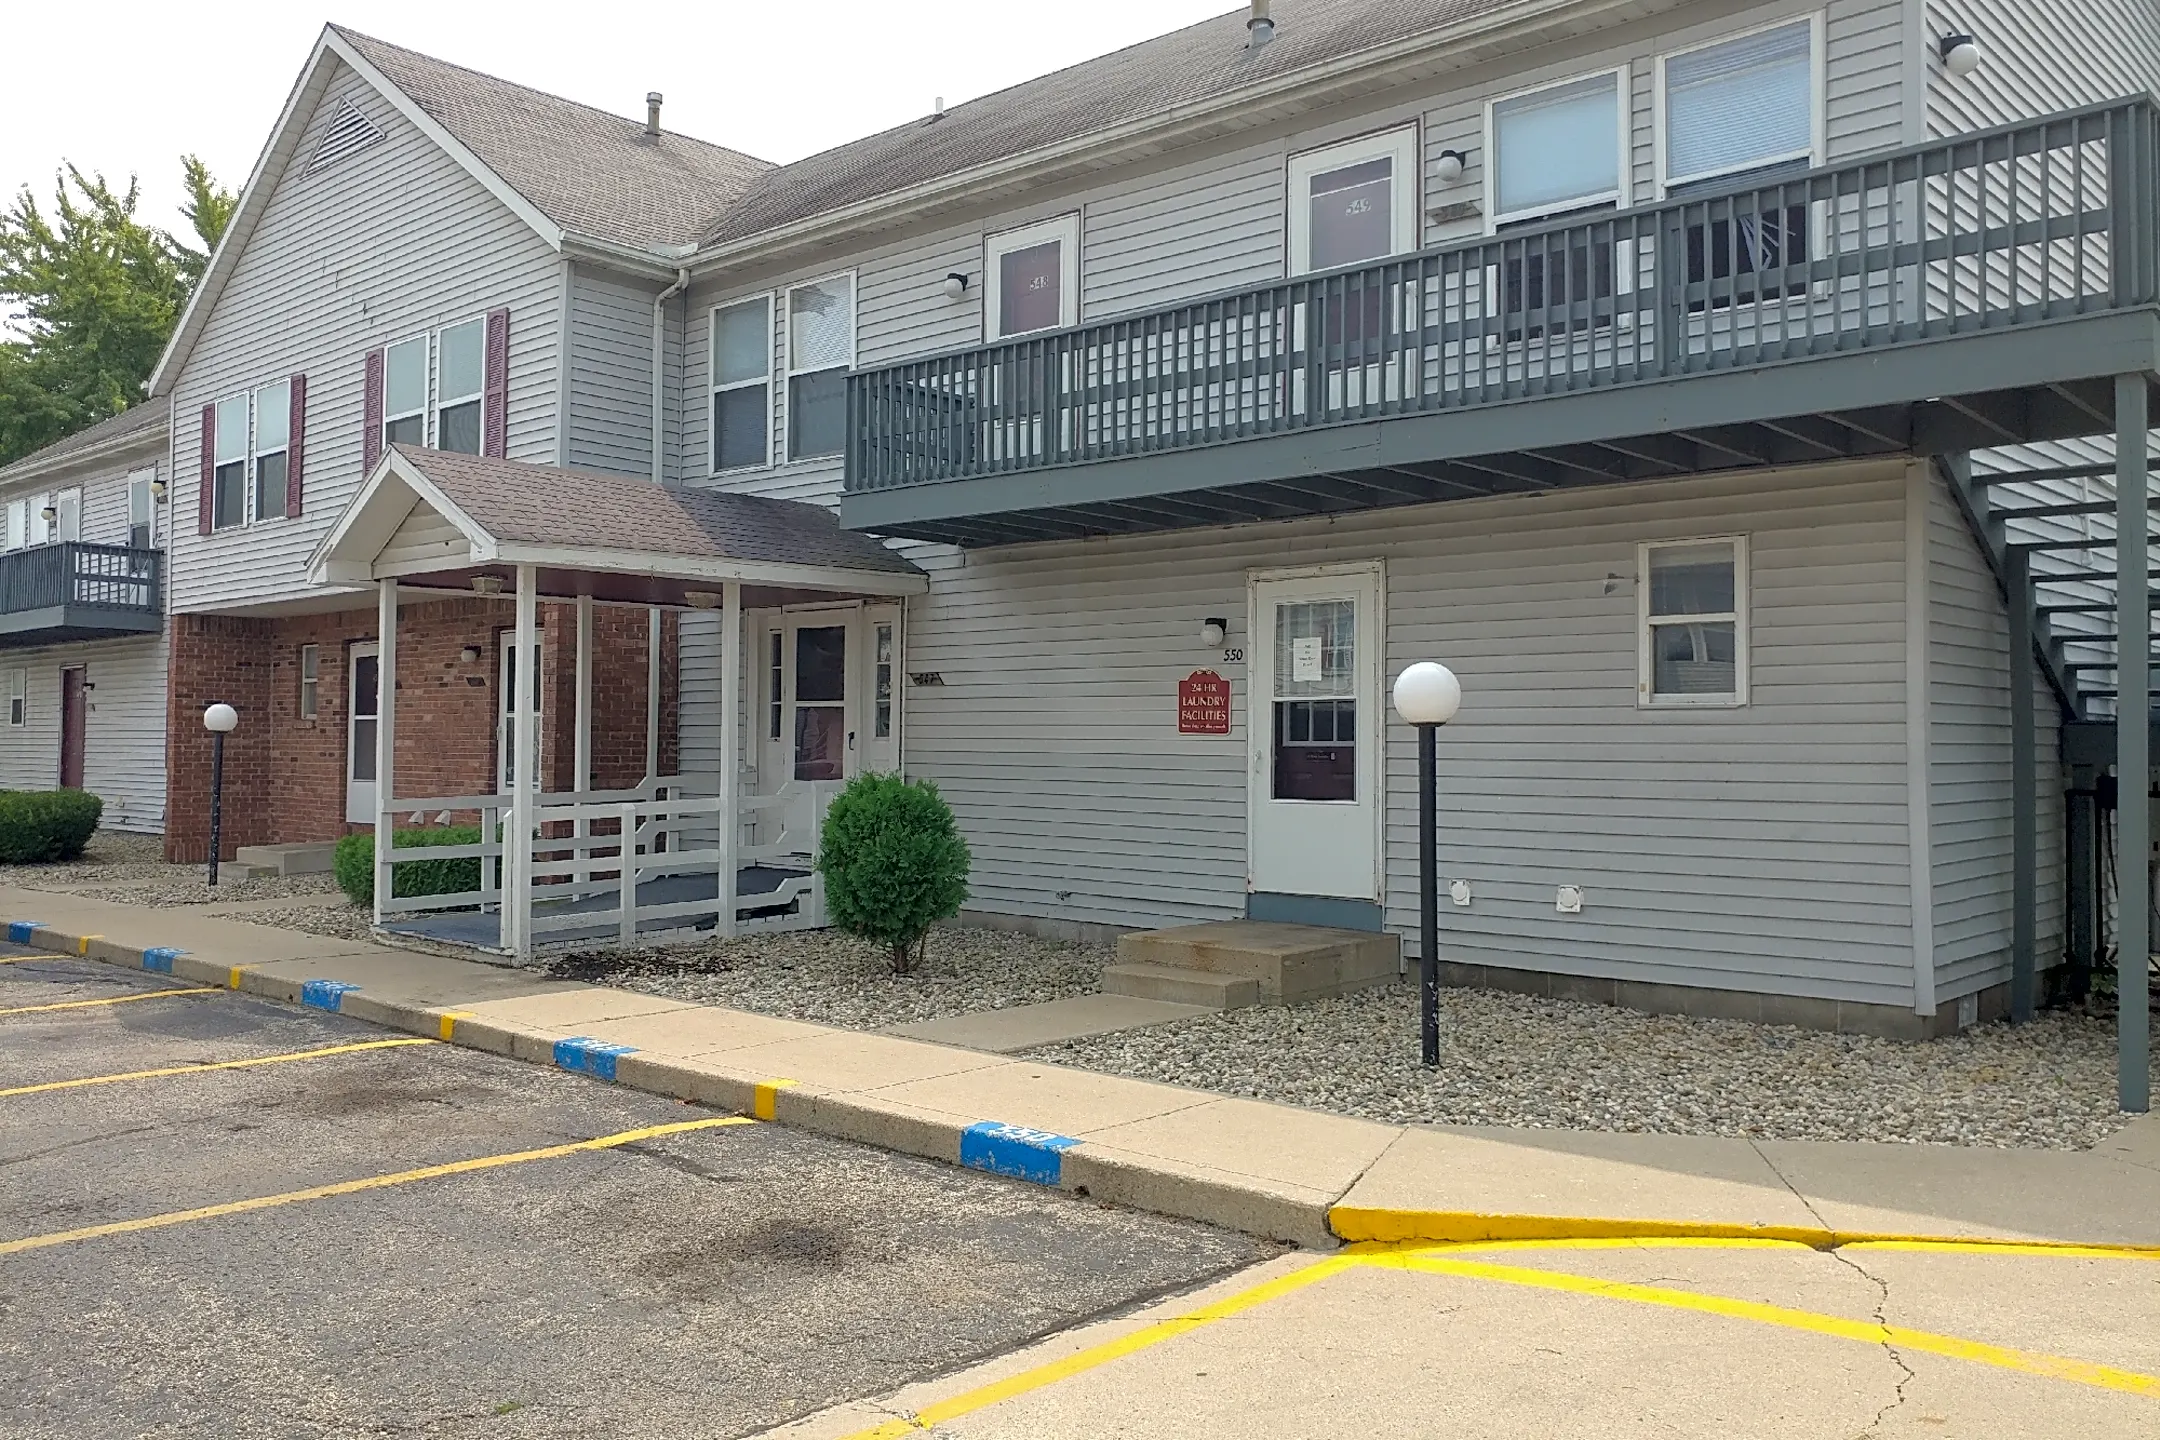 Pool - Eastgate Apartments - Warsaw, IN